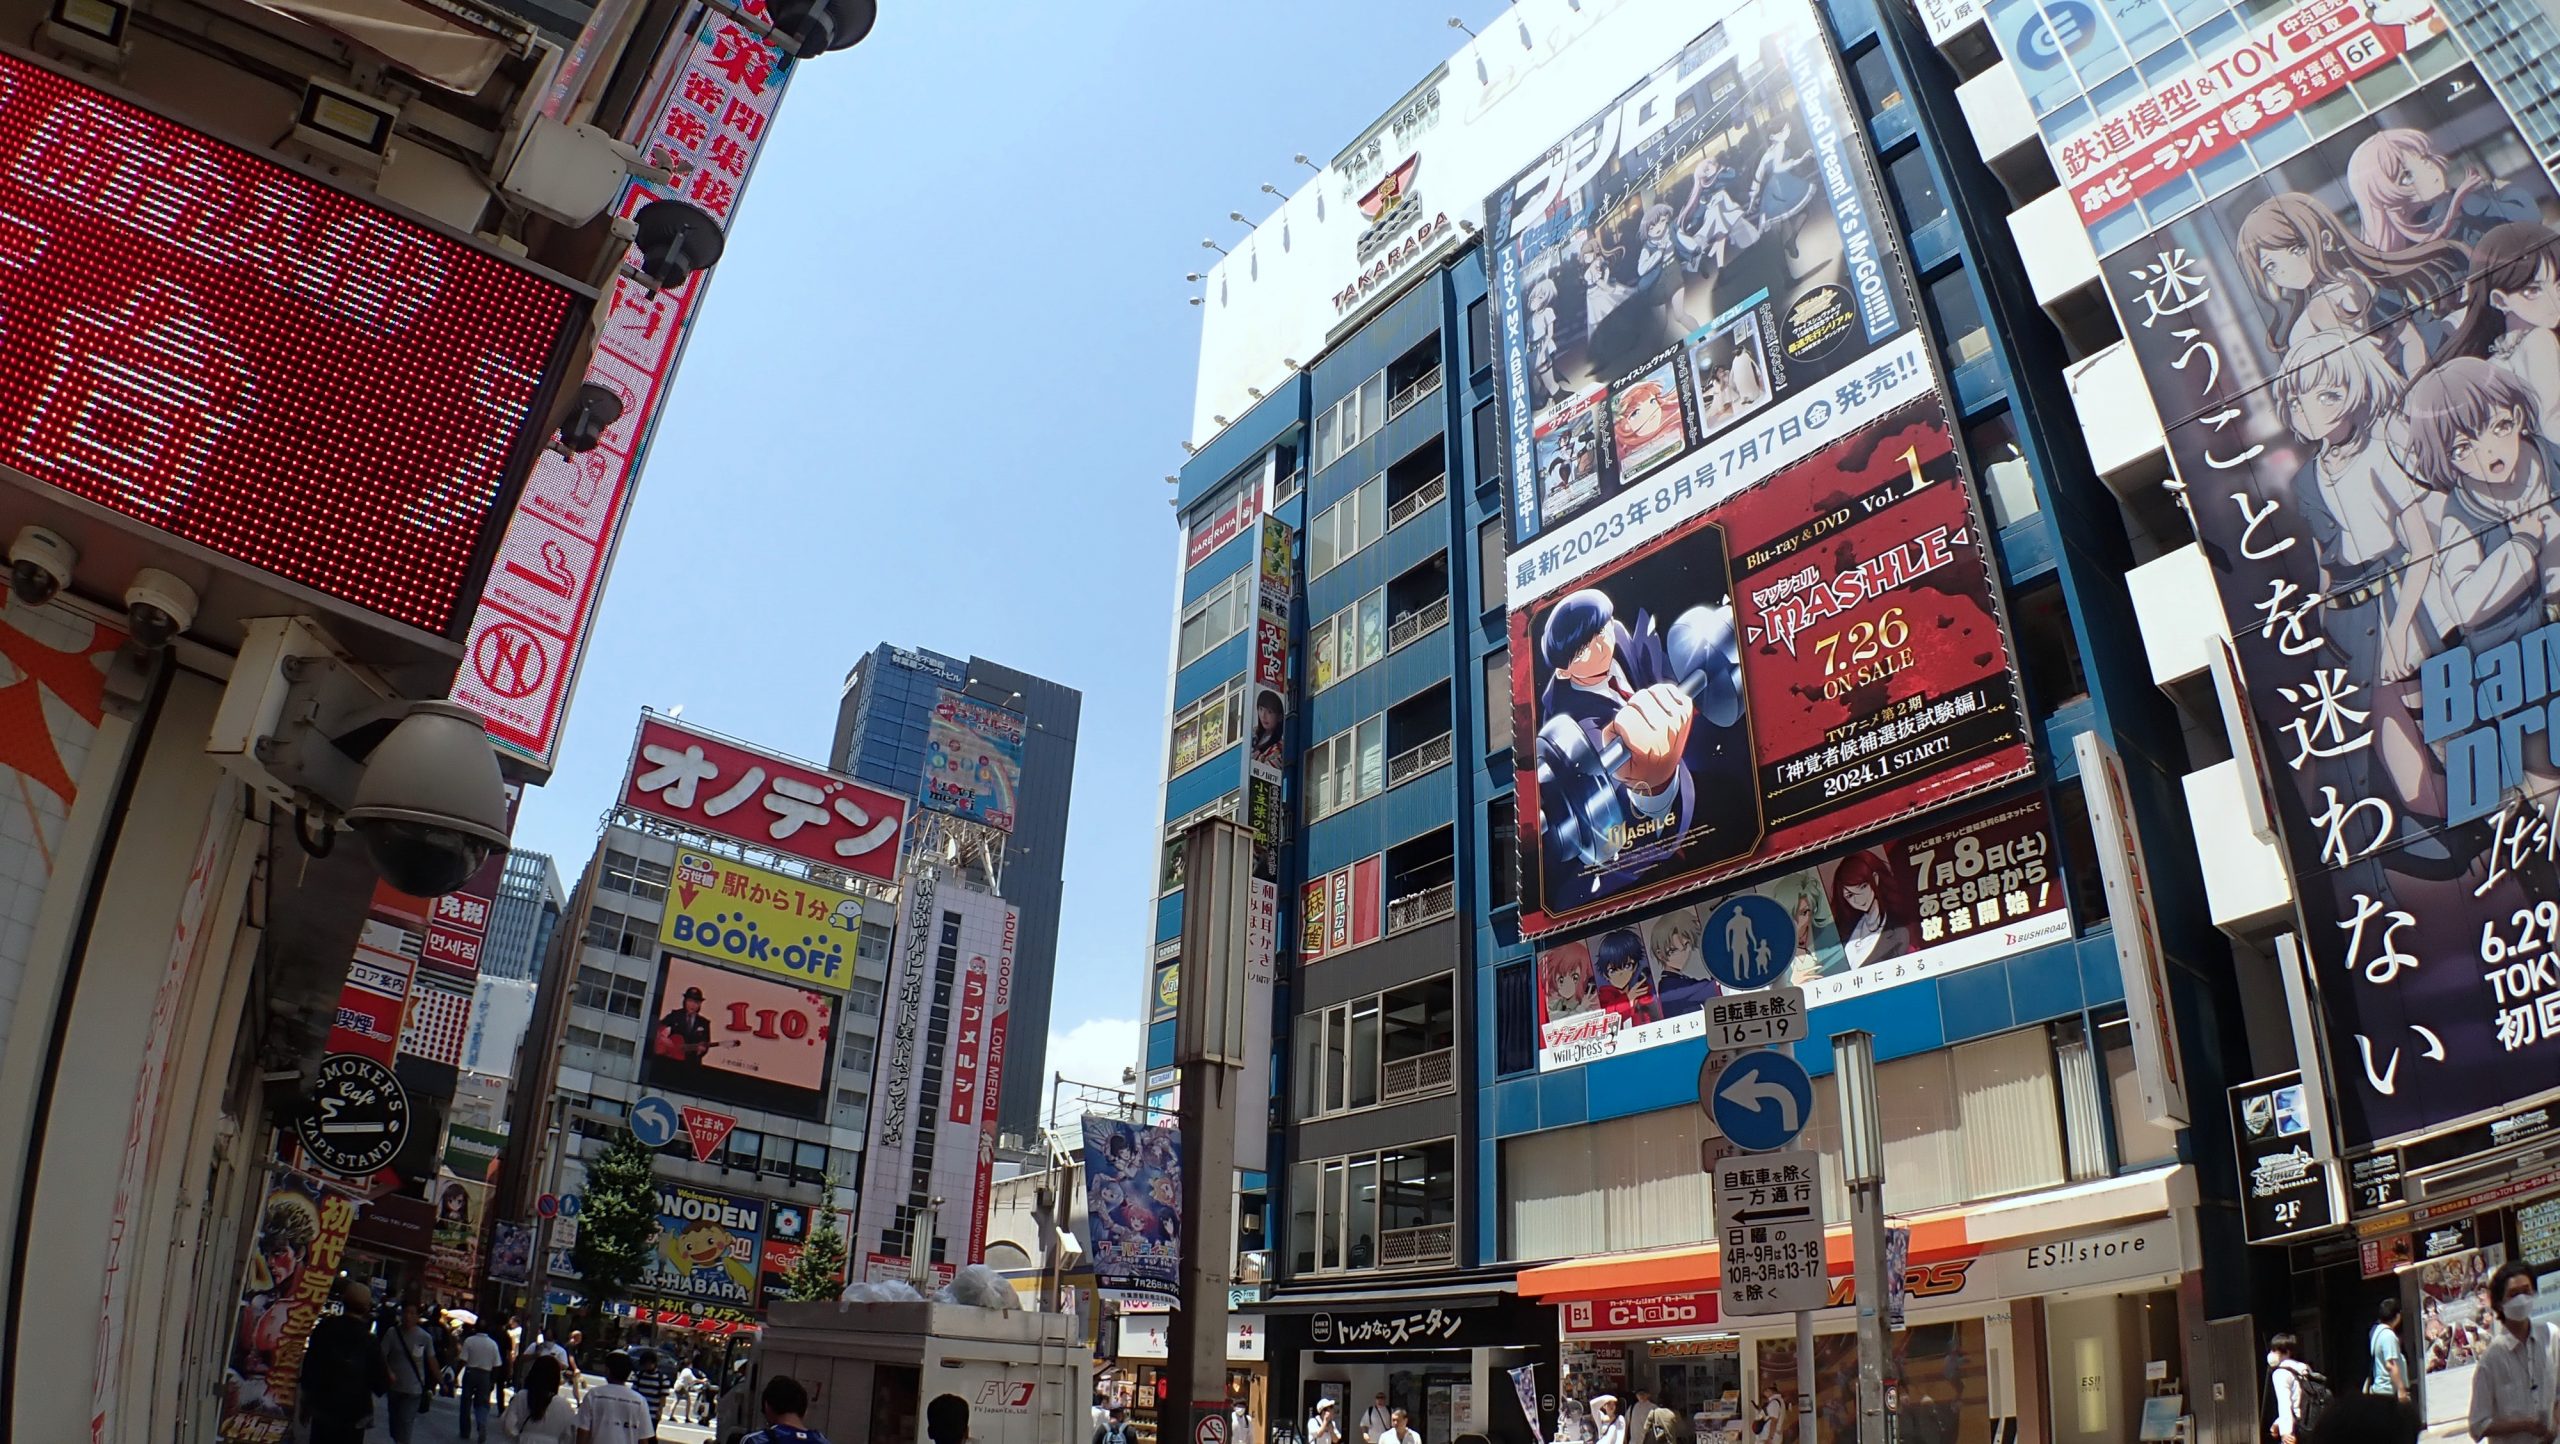 One of the multitude of anime shops in the Akihabara Shopping area